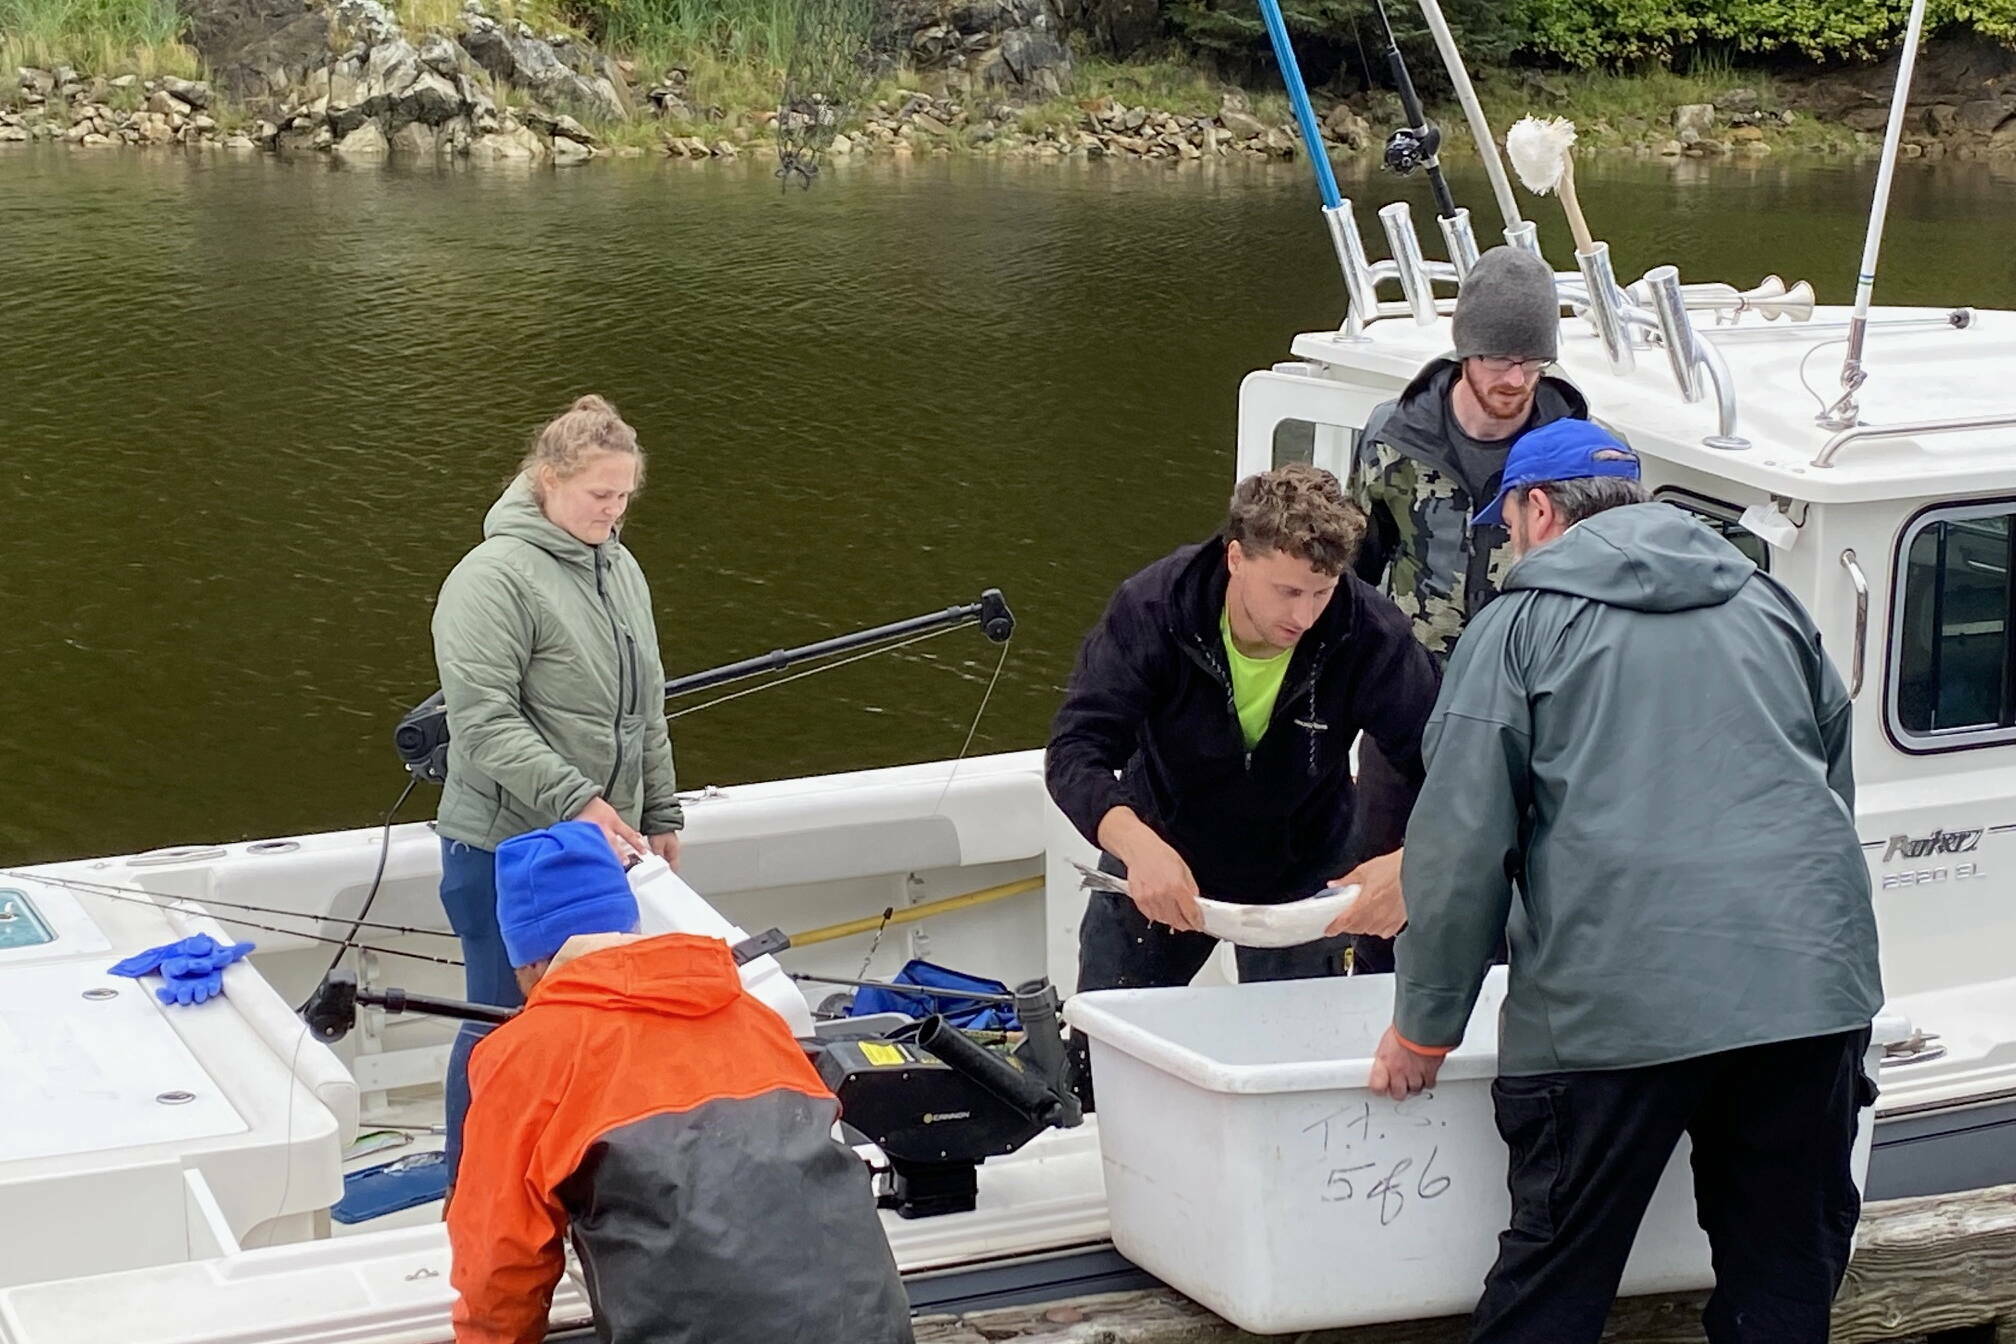 Allison Lihou, John Diamond and Brian Thomason (aboard boat) turn in five salmon, including four scholarship fish, to dock volunteers Jason Bailey (orange jacket) and Bobby Dilg at the Douglas Harbor station during the 77th annual Golden North Salmon Derby on Sunday. (Meredith Jordan / Juneau Empire)